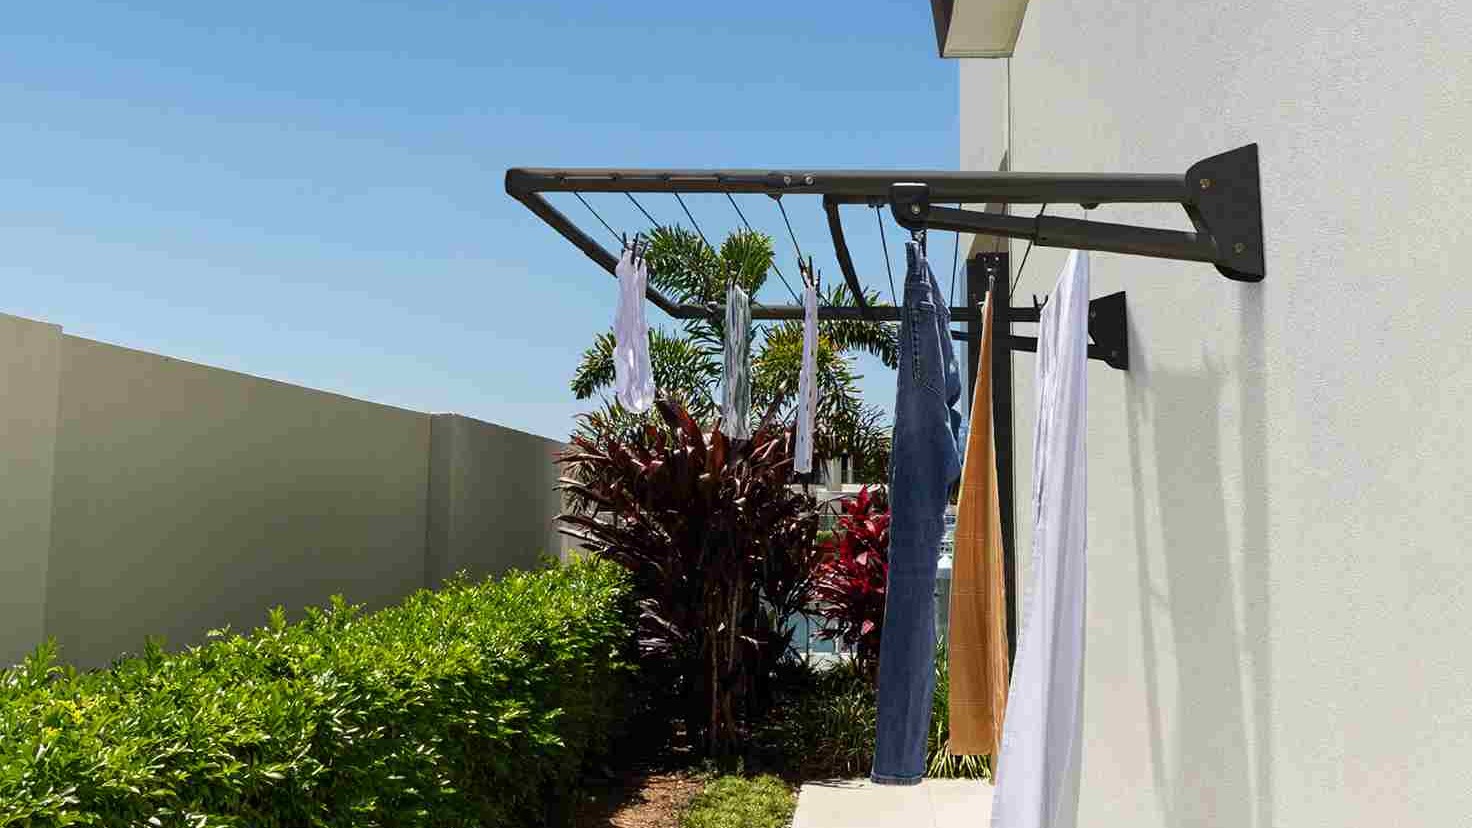 12 Best Clothesline Choices for a Family of 3